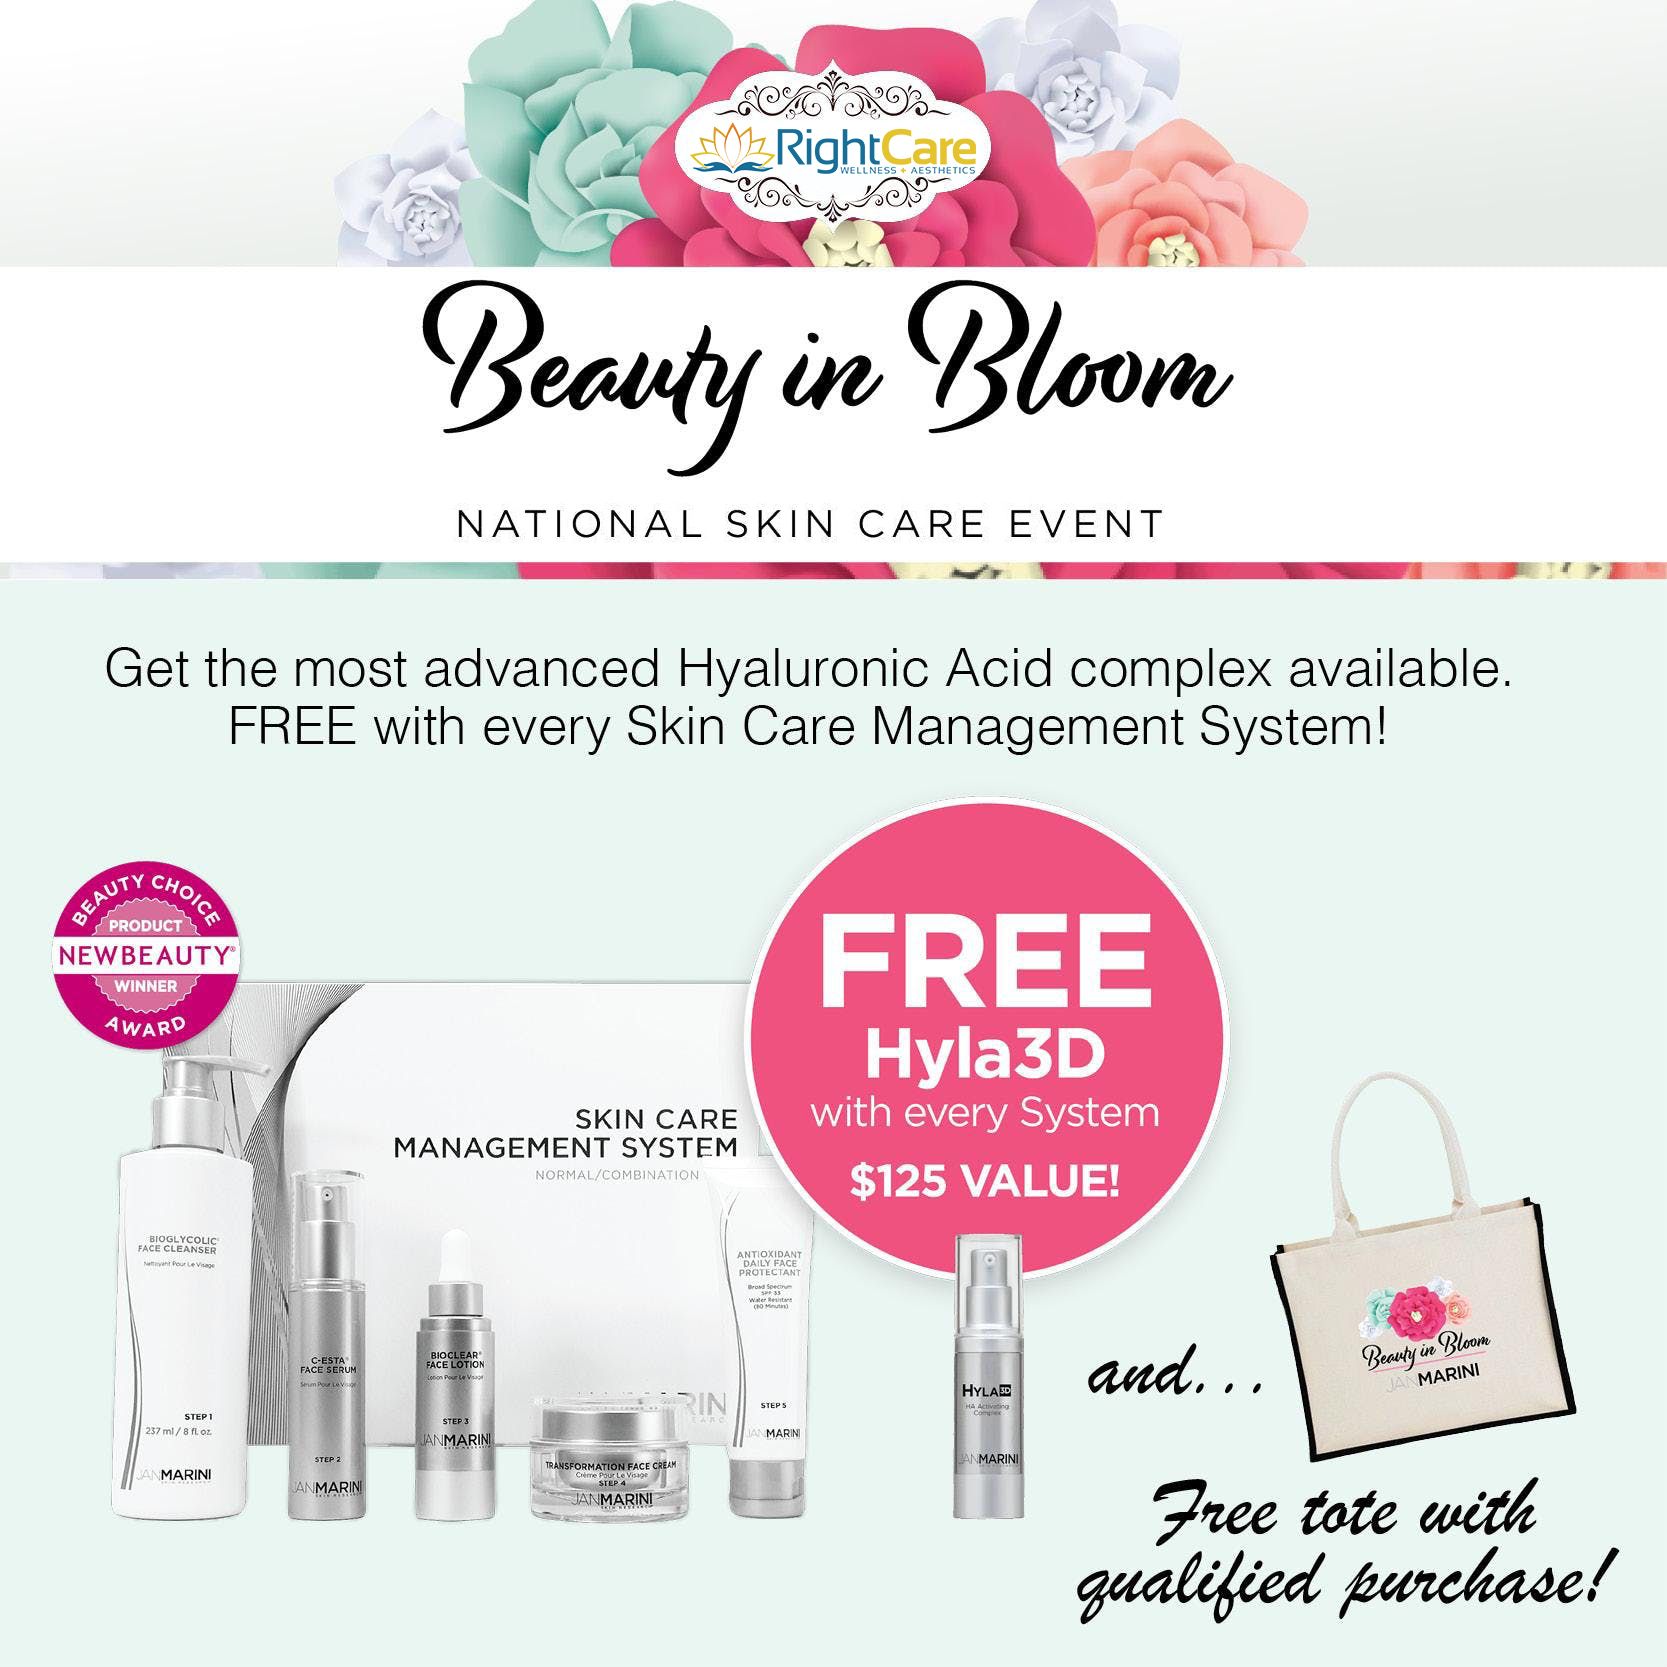 Beauty in Bloom Event from Jan Marini